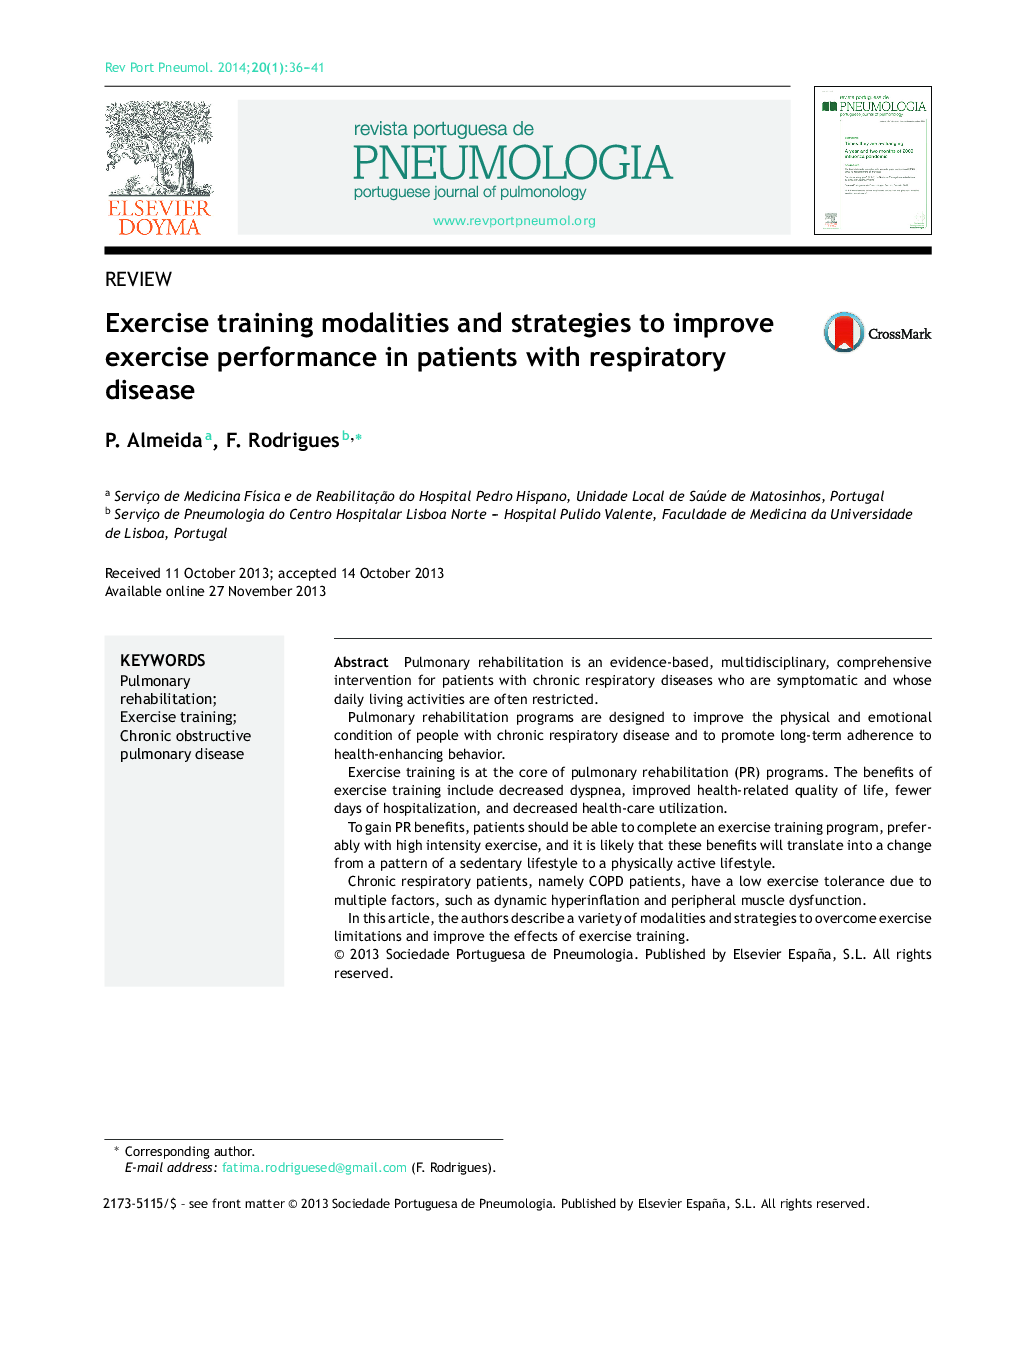 Exercise training modalities and strategies to improve exercise performance in patients with respiratory disease